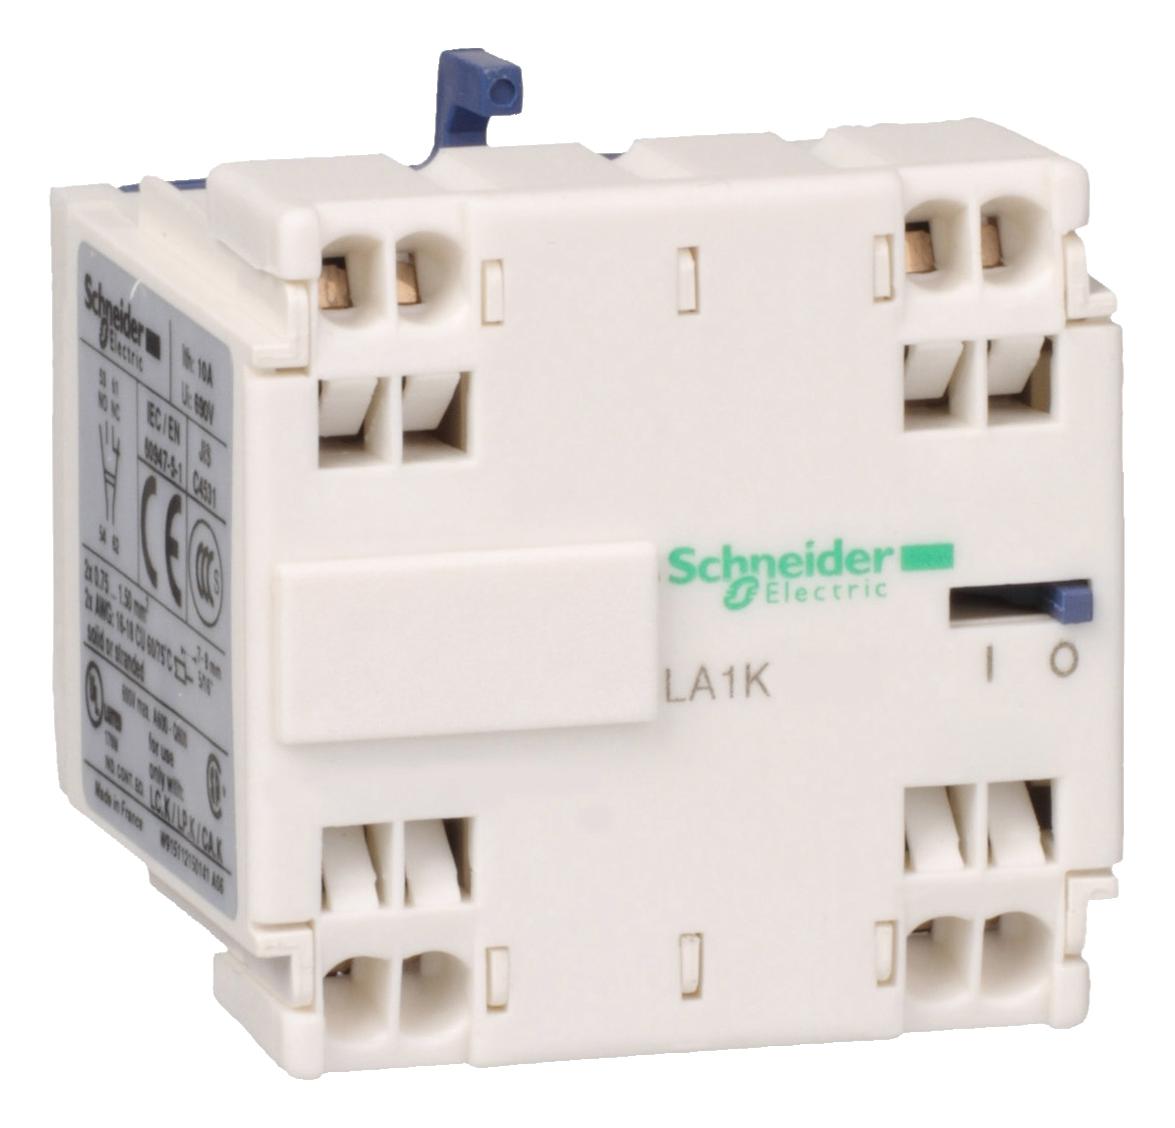 LA1KN113 AUXILIARY CONTACTS SCHNEIDER ELECTRIC